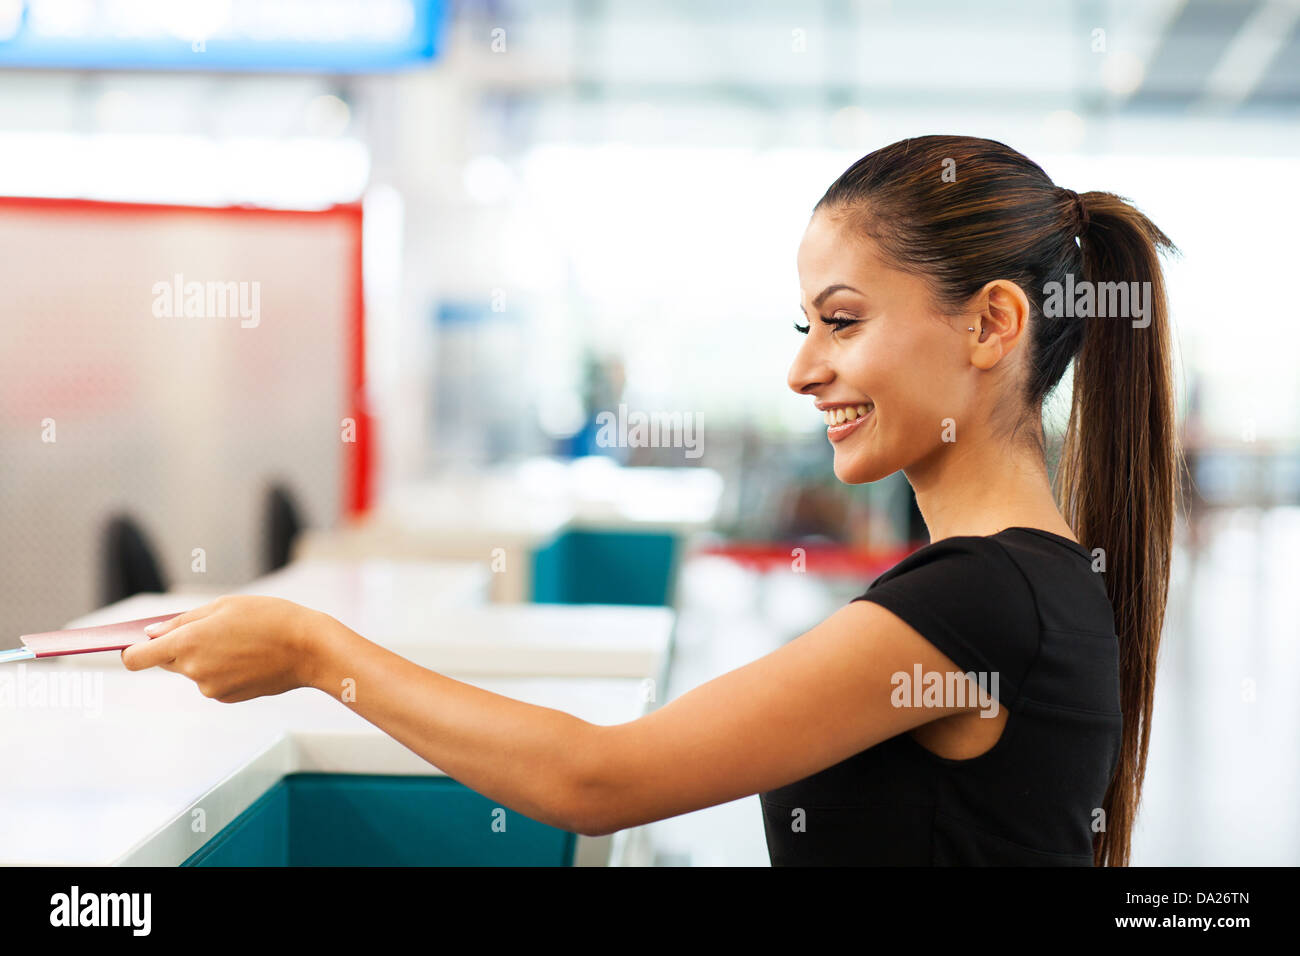 attractive businesswoman handing over air ticket at airport check in counter Stock Photo